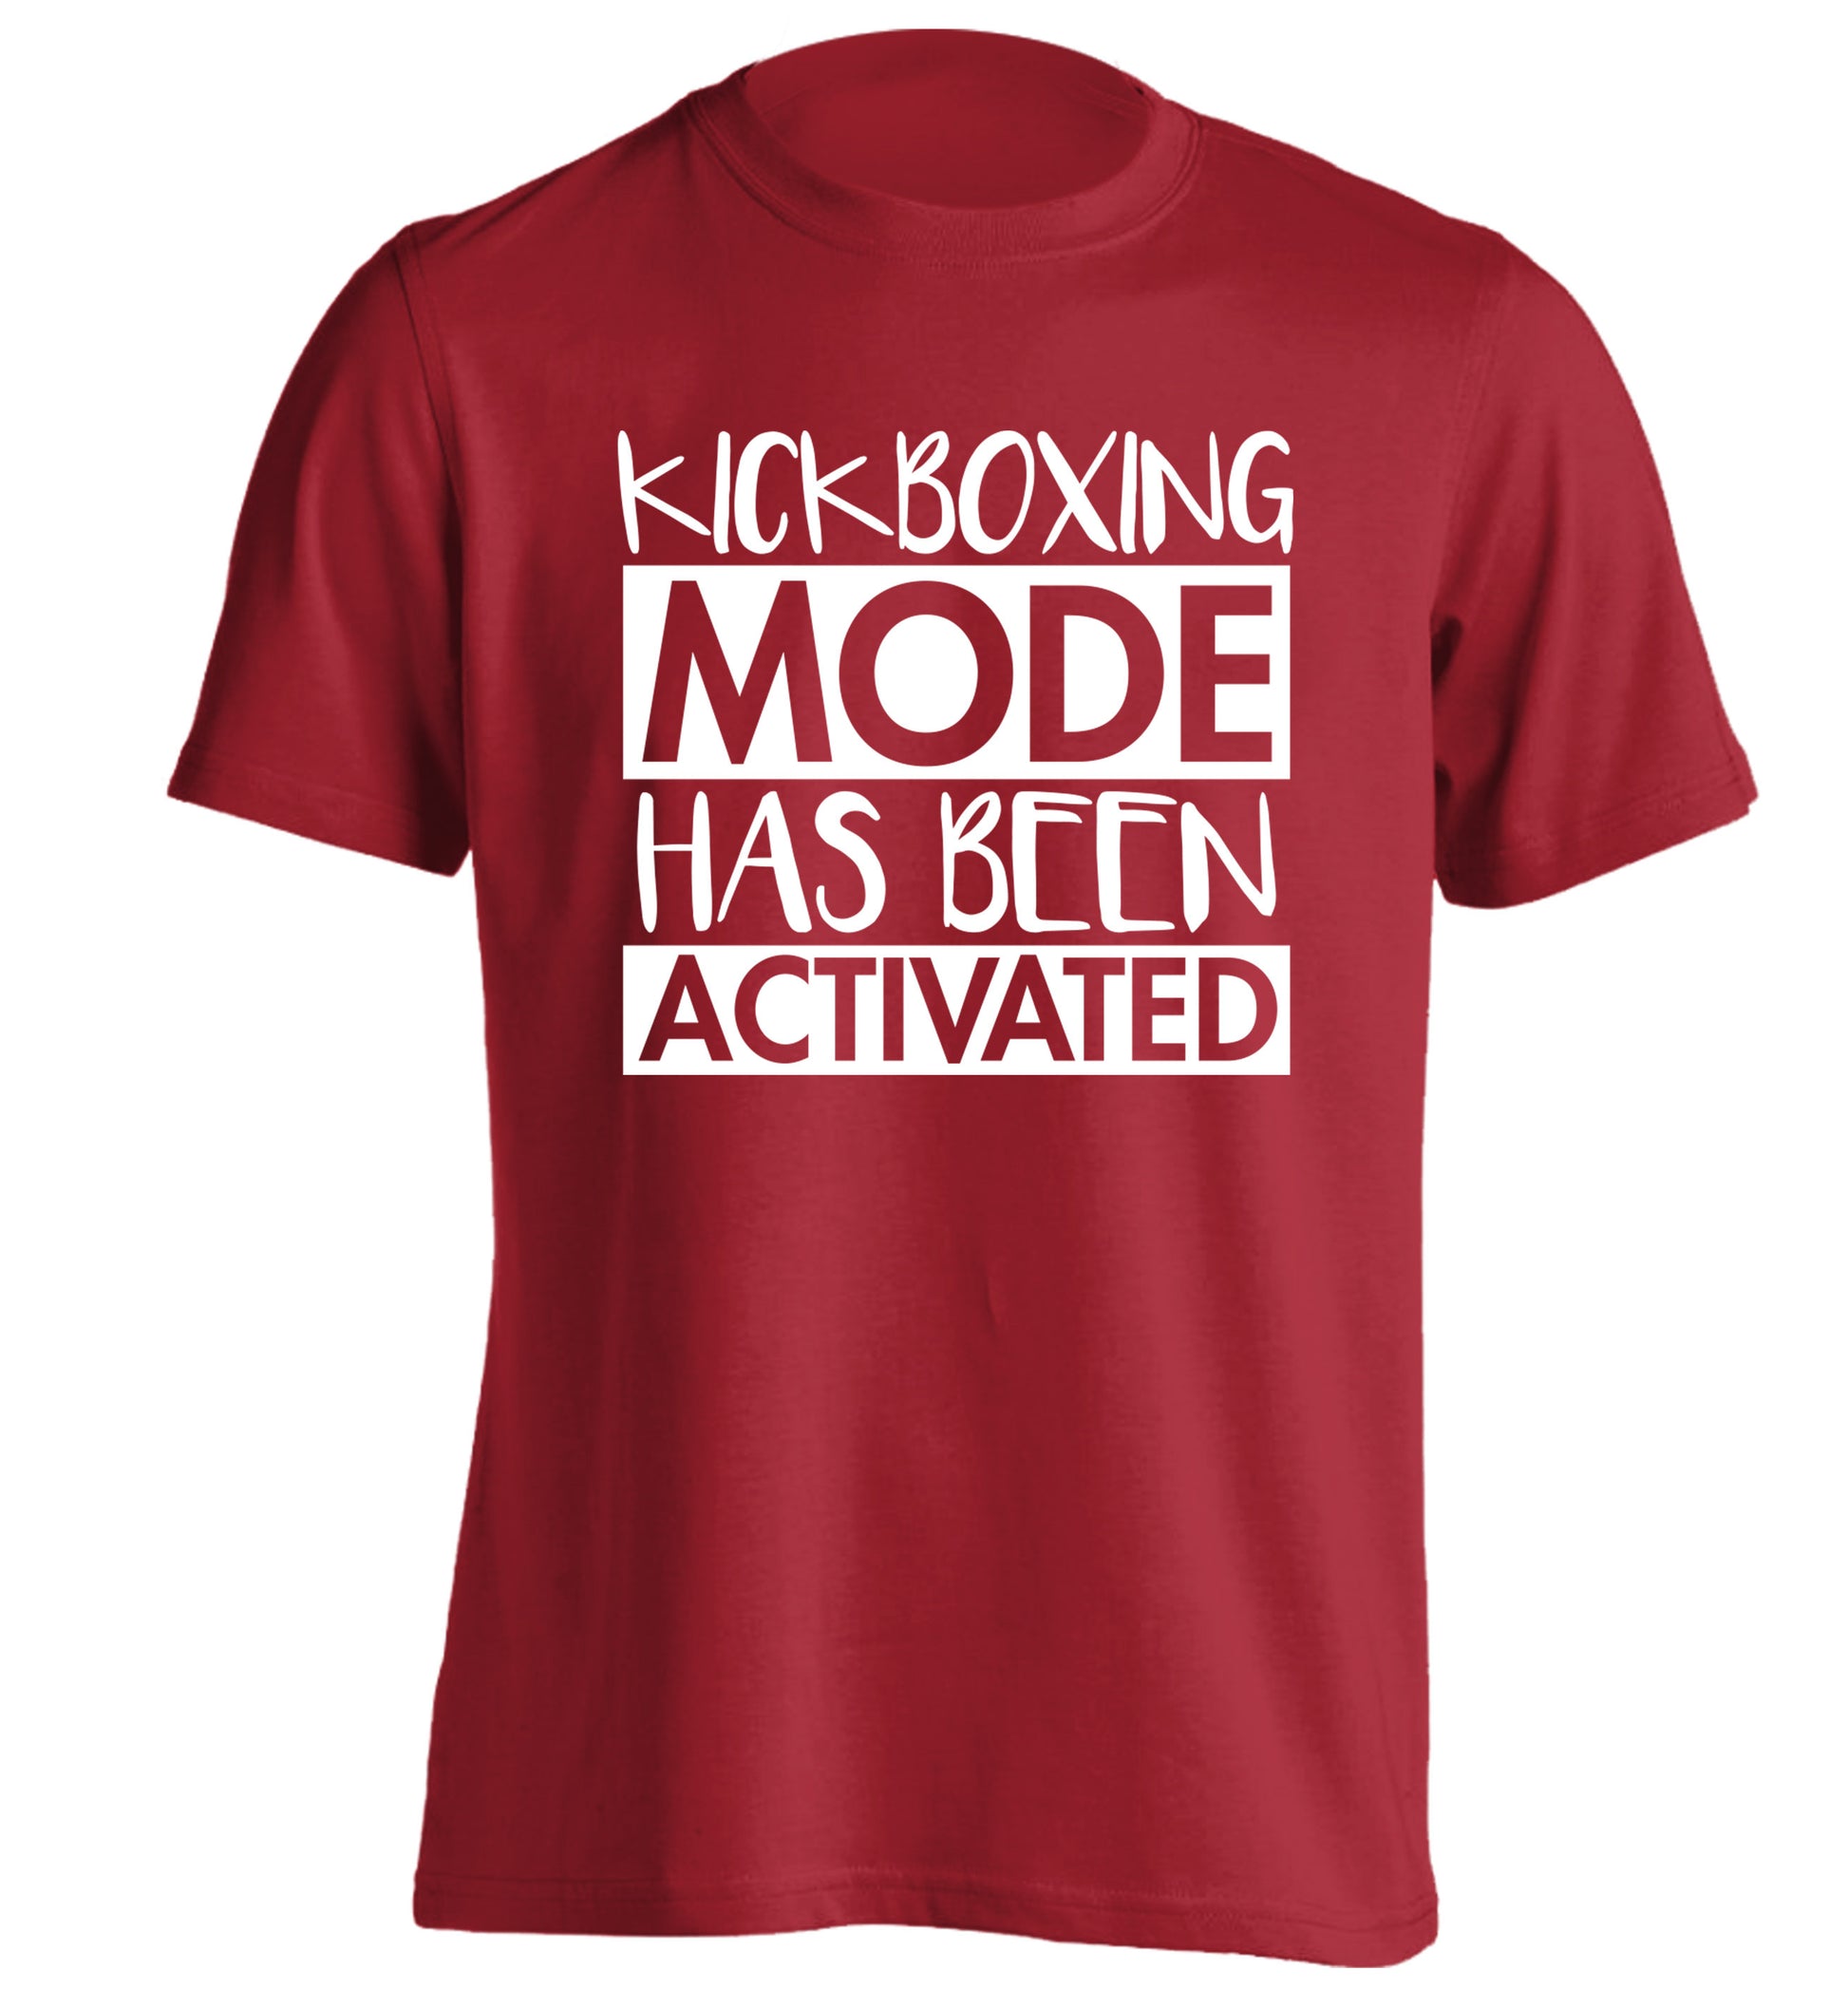 Kickboxing mode activated adults unisex red Tshirt 2XL